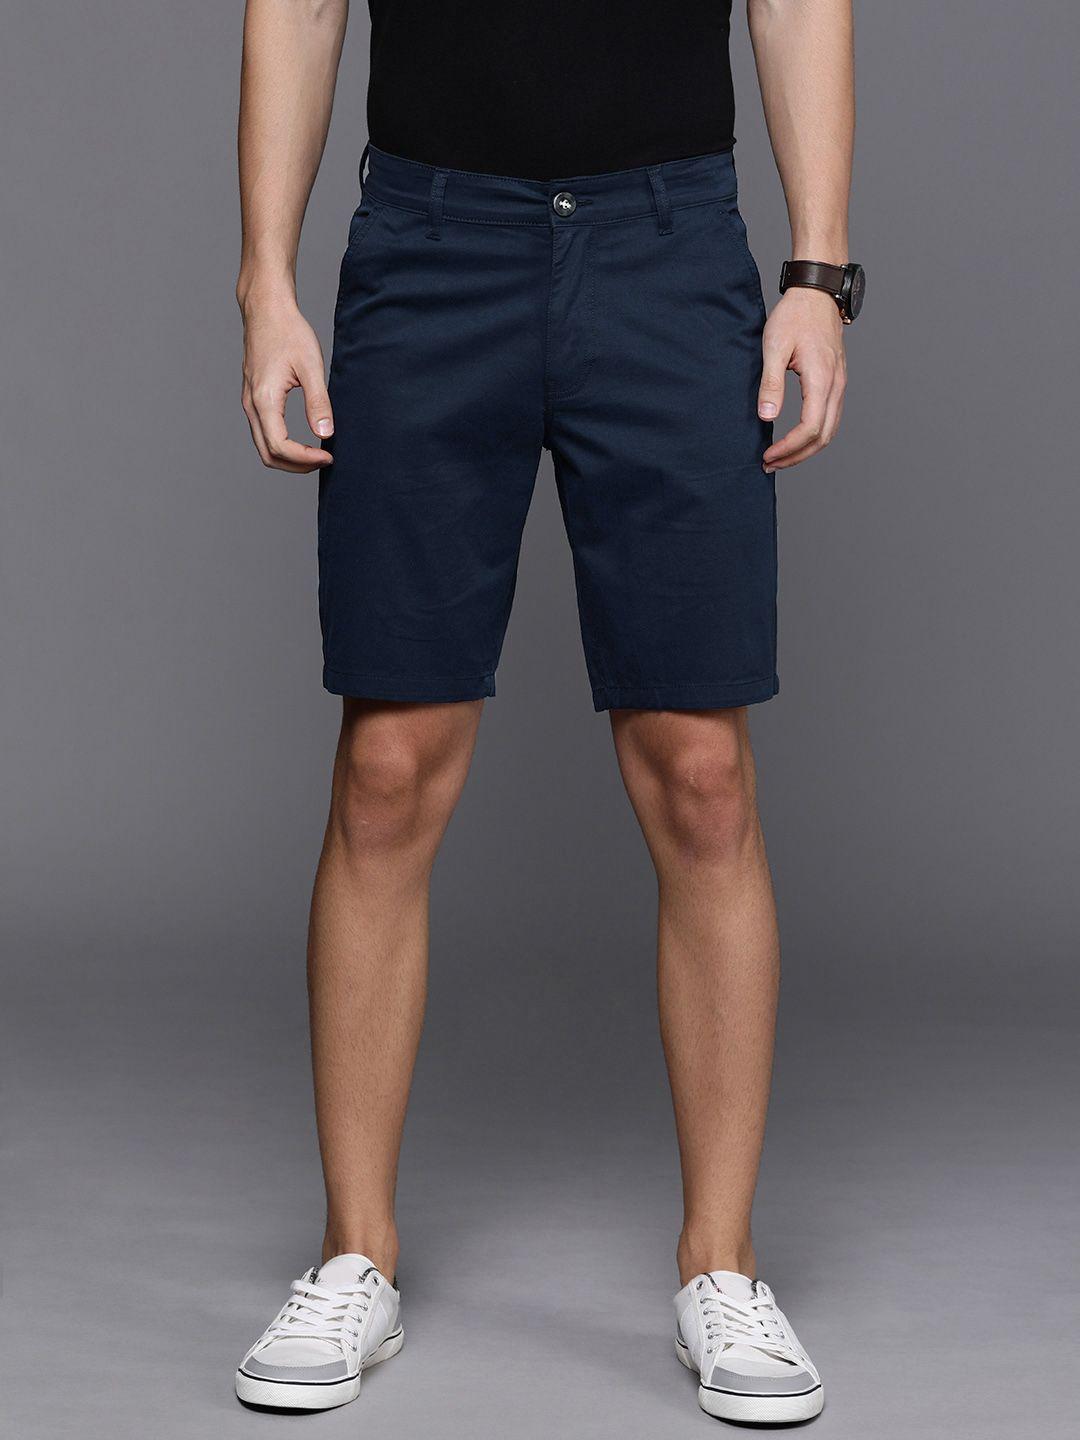 wrogn men navy blue solid slim fit chino shorts